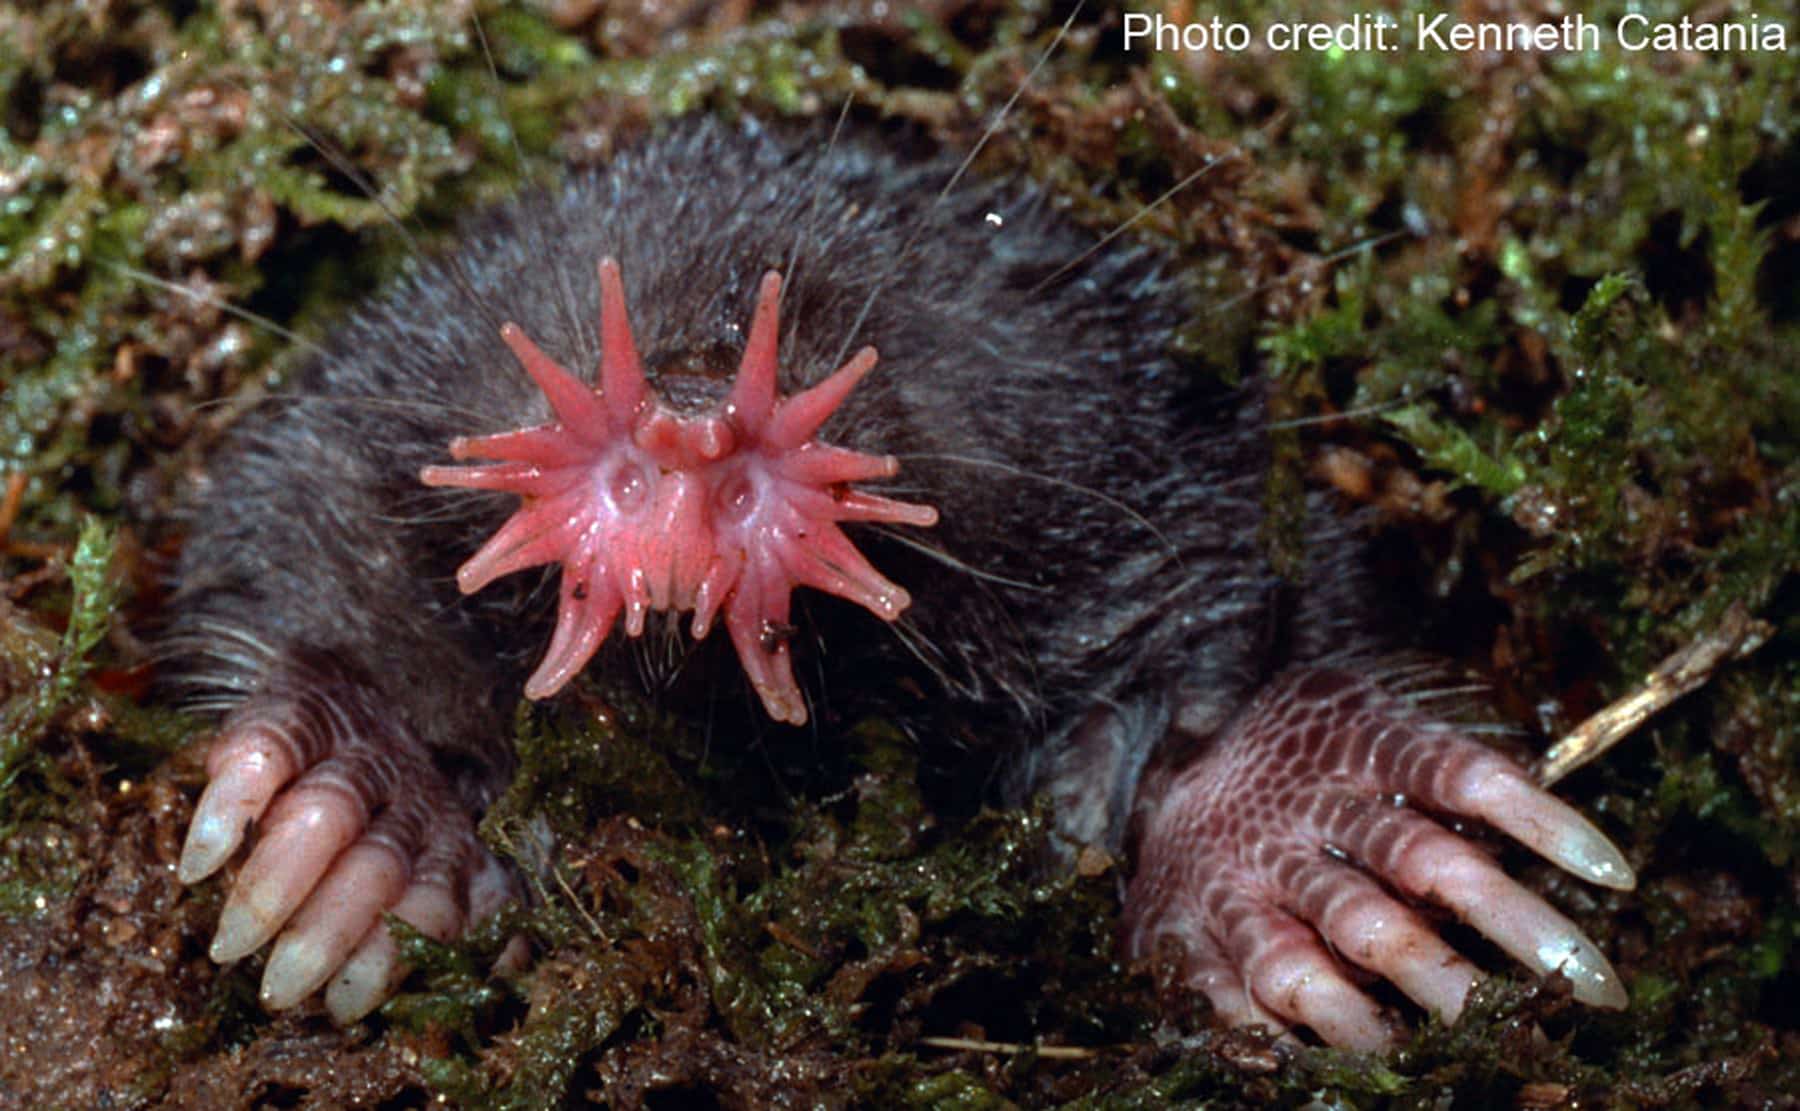 Star Nosed Mole coming out of the dirt